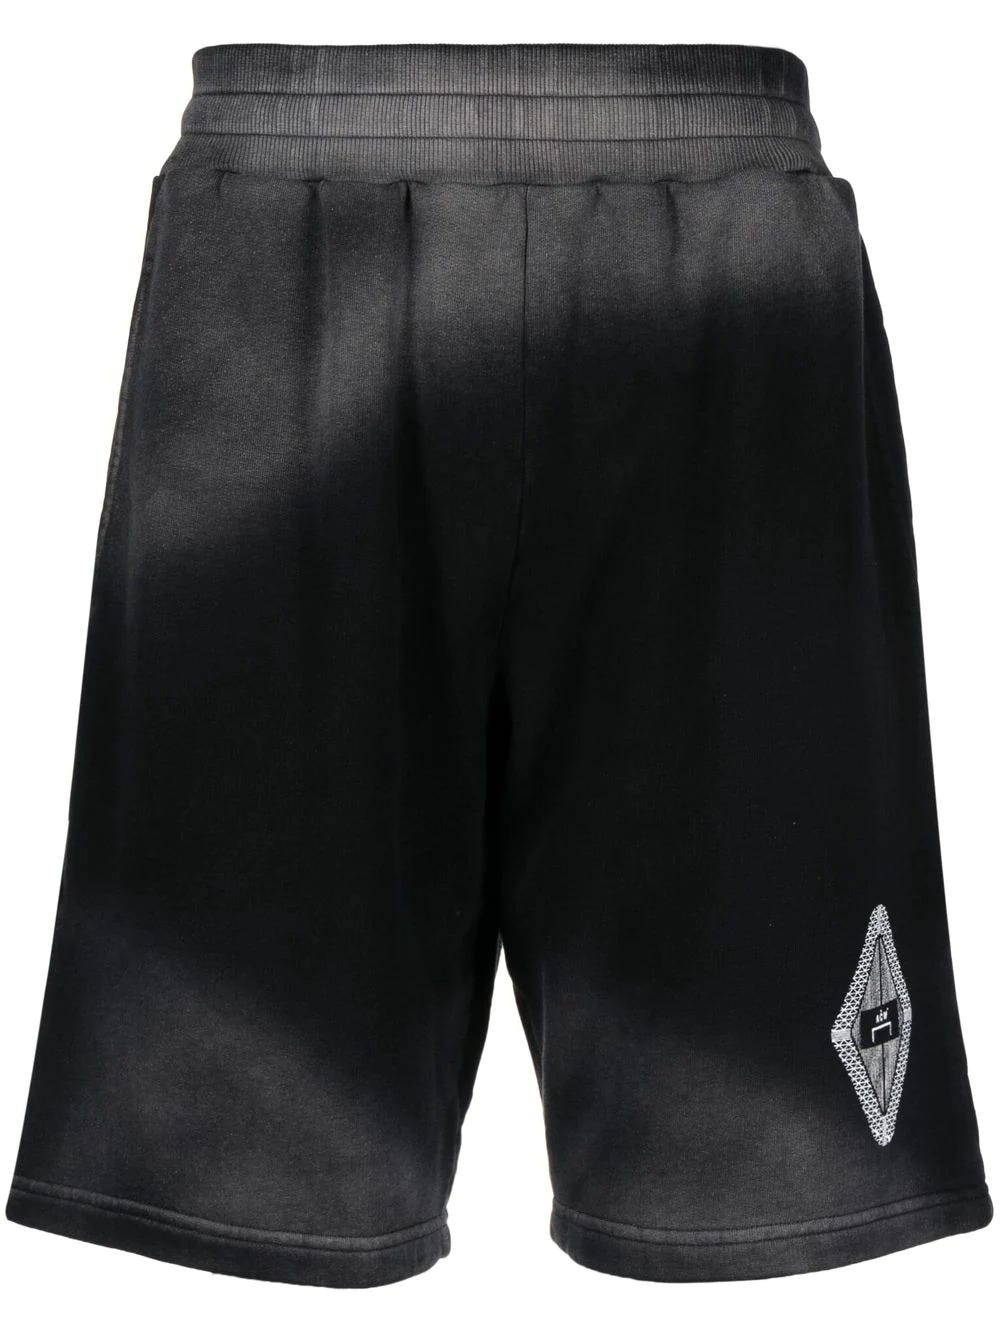 A-COLD-WALL* BLACK SPORTS SHORTS WITH SHADING AND ELASTICATED WAISTBAND